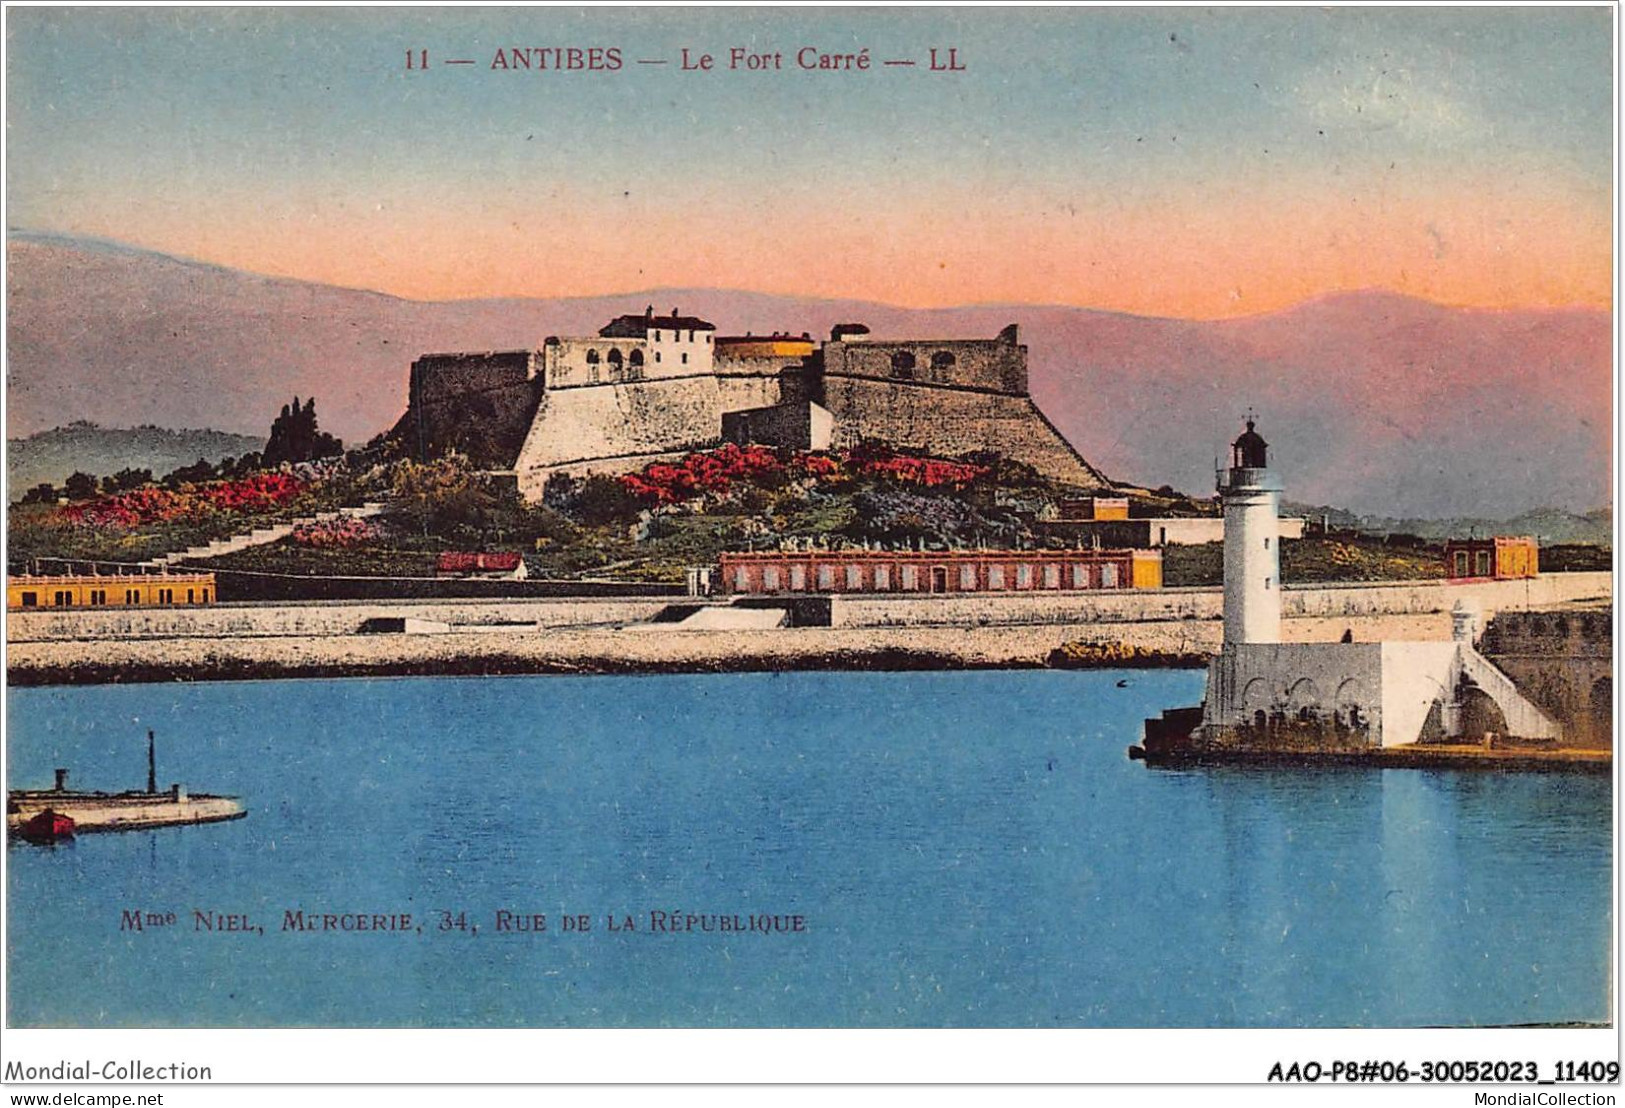 AAOP8-06-0659 - ANTIBES - Le Fort Carré - Antibes - Oude Stad